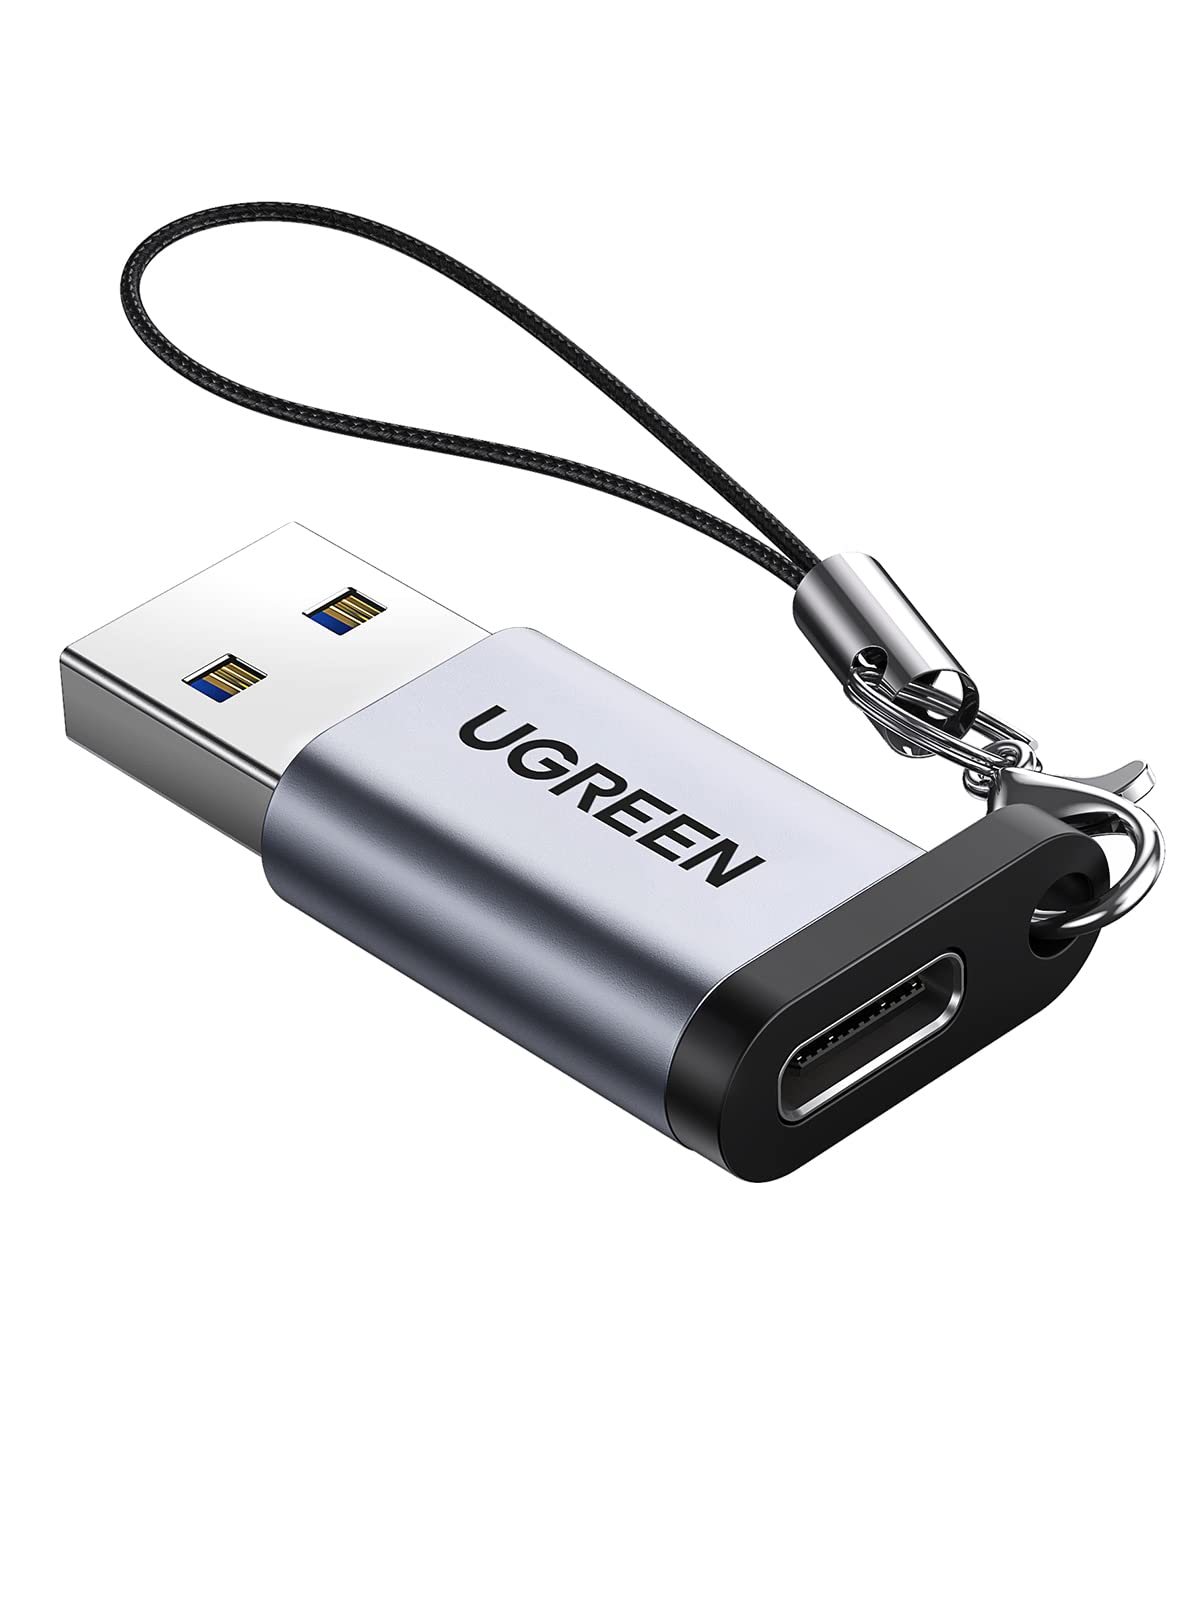 UGREEN USB C to USB Adapter USB 3.1 Female to USB C Converter Gen1 5Gbps Data Transmission Type C Adapter Compatible with MacBook Pro/iPad Pro/Samsung Galaxy S22/ Laptops/iPhone/Huawei/Xiaomi